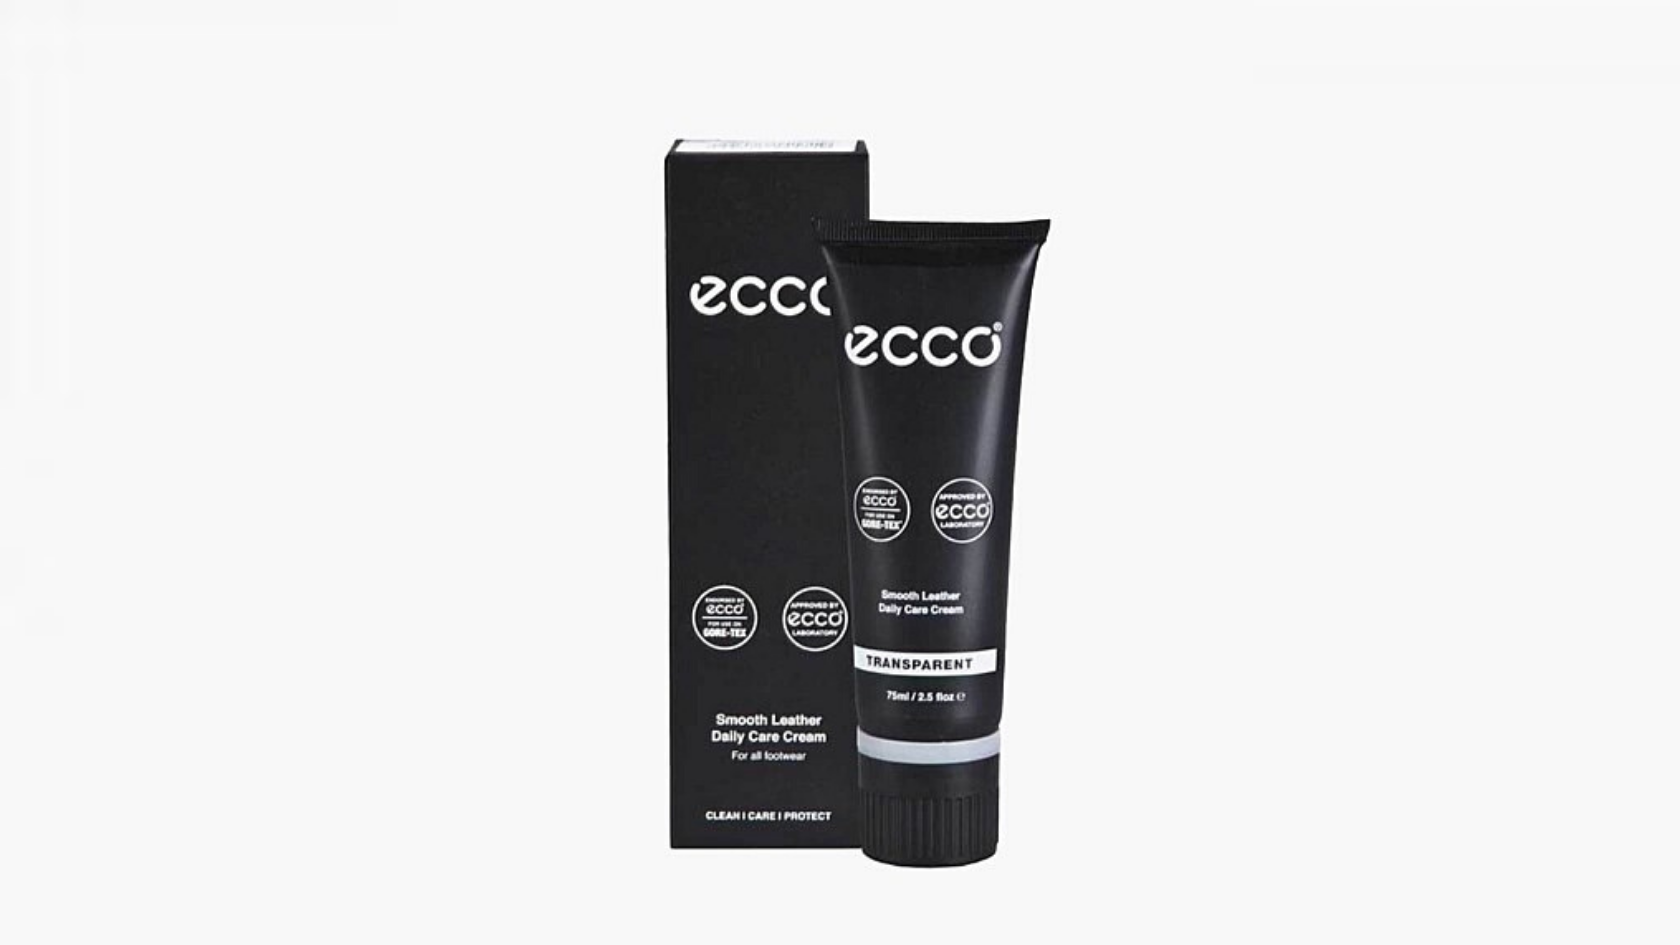 Ecco brand black leather conditioner bottles against a neutral background.